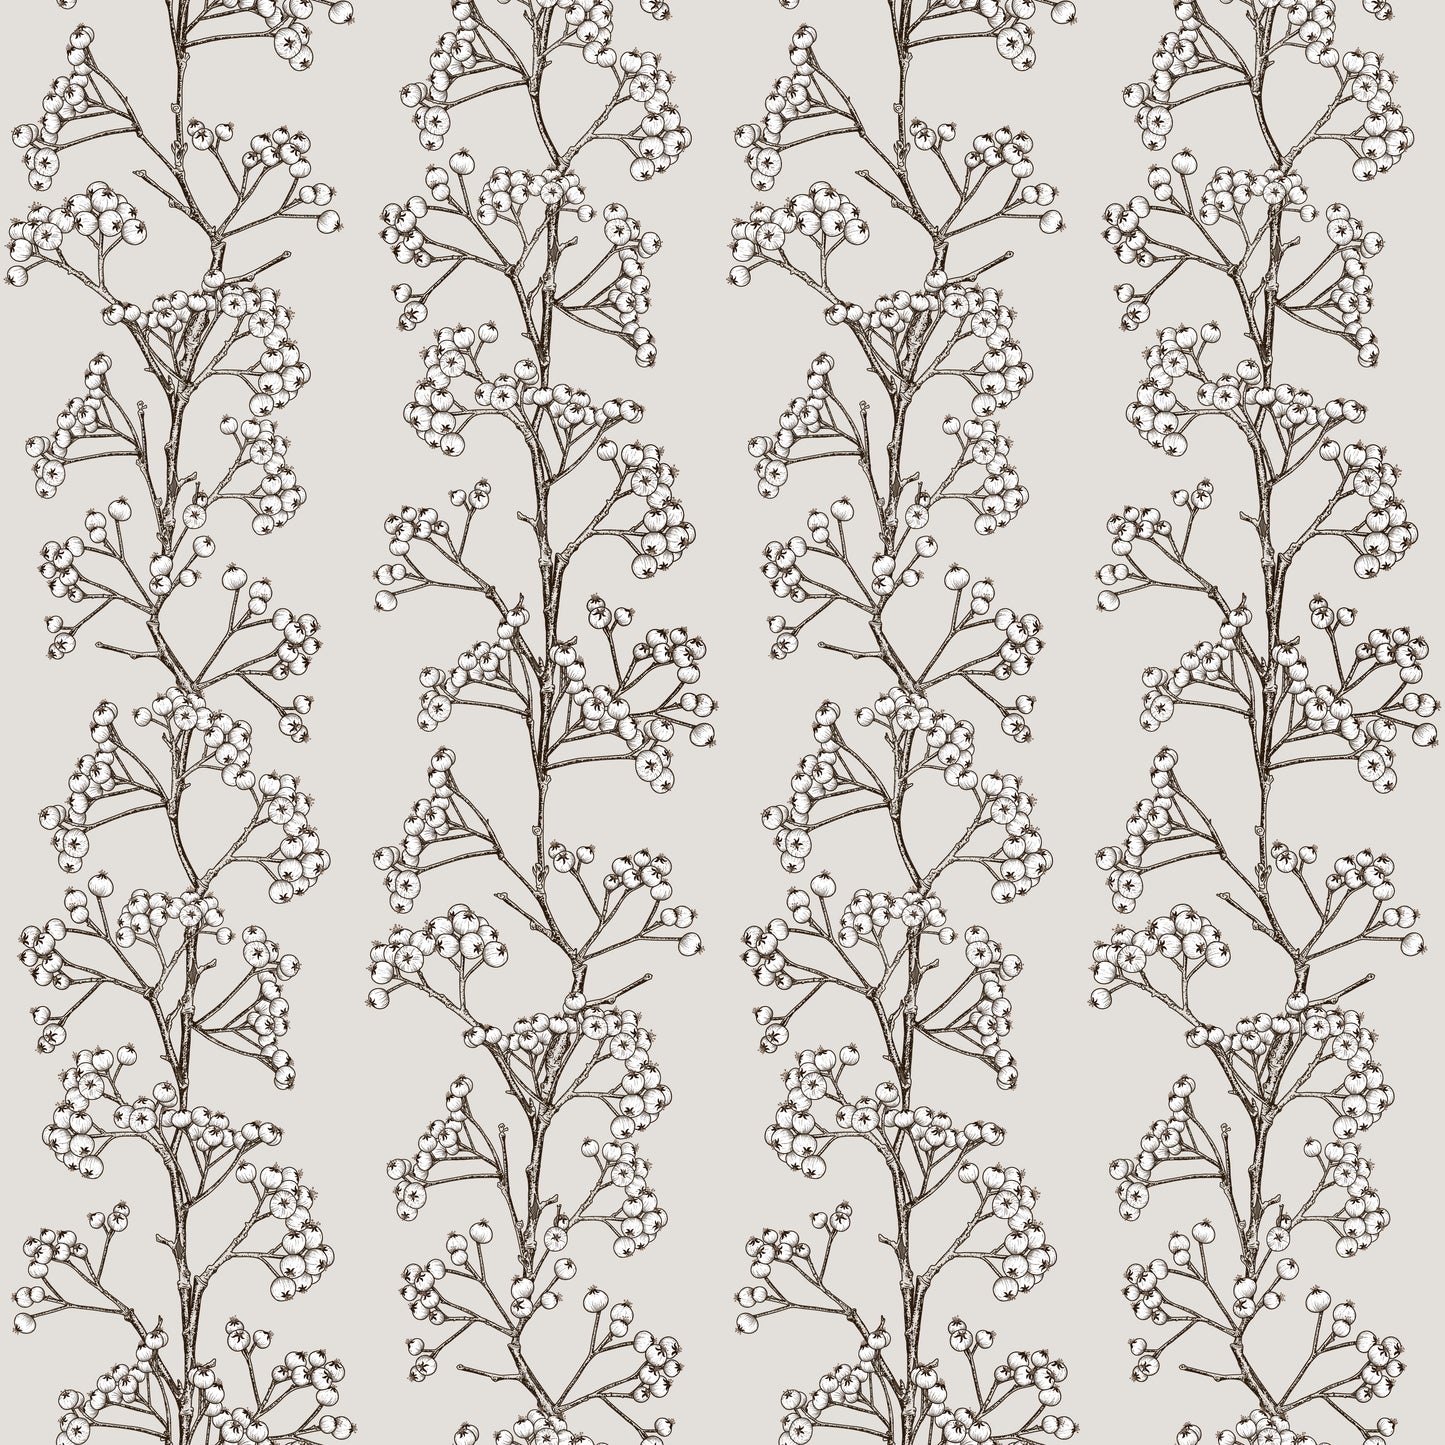 Grey/gray firethorns print on white background easy to install and remove peel and stick custom wallpaper available in different lengths/sizes locally created and printed in Canada. Removable, washable, durable, commercial grade, customizable and water proof.